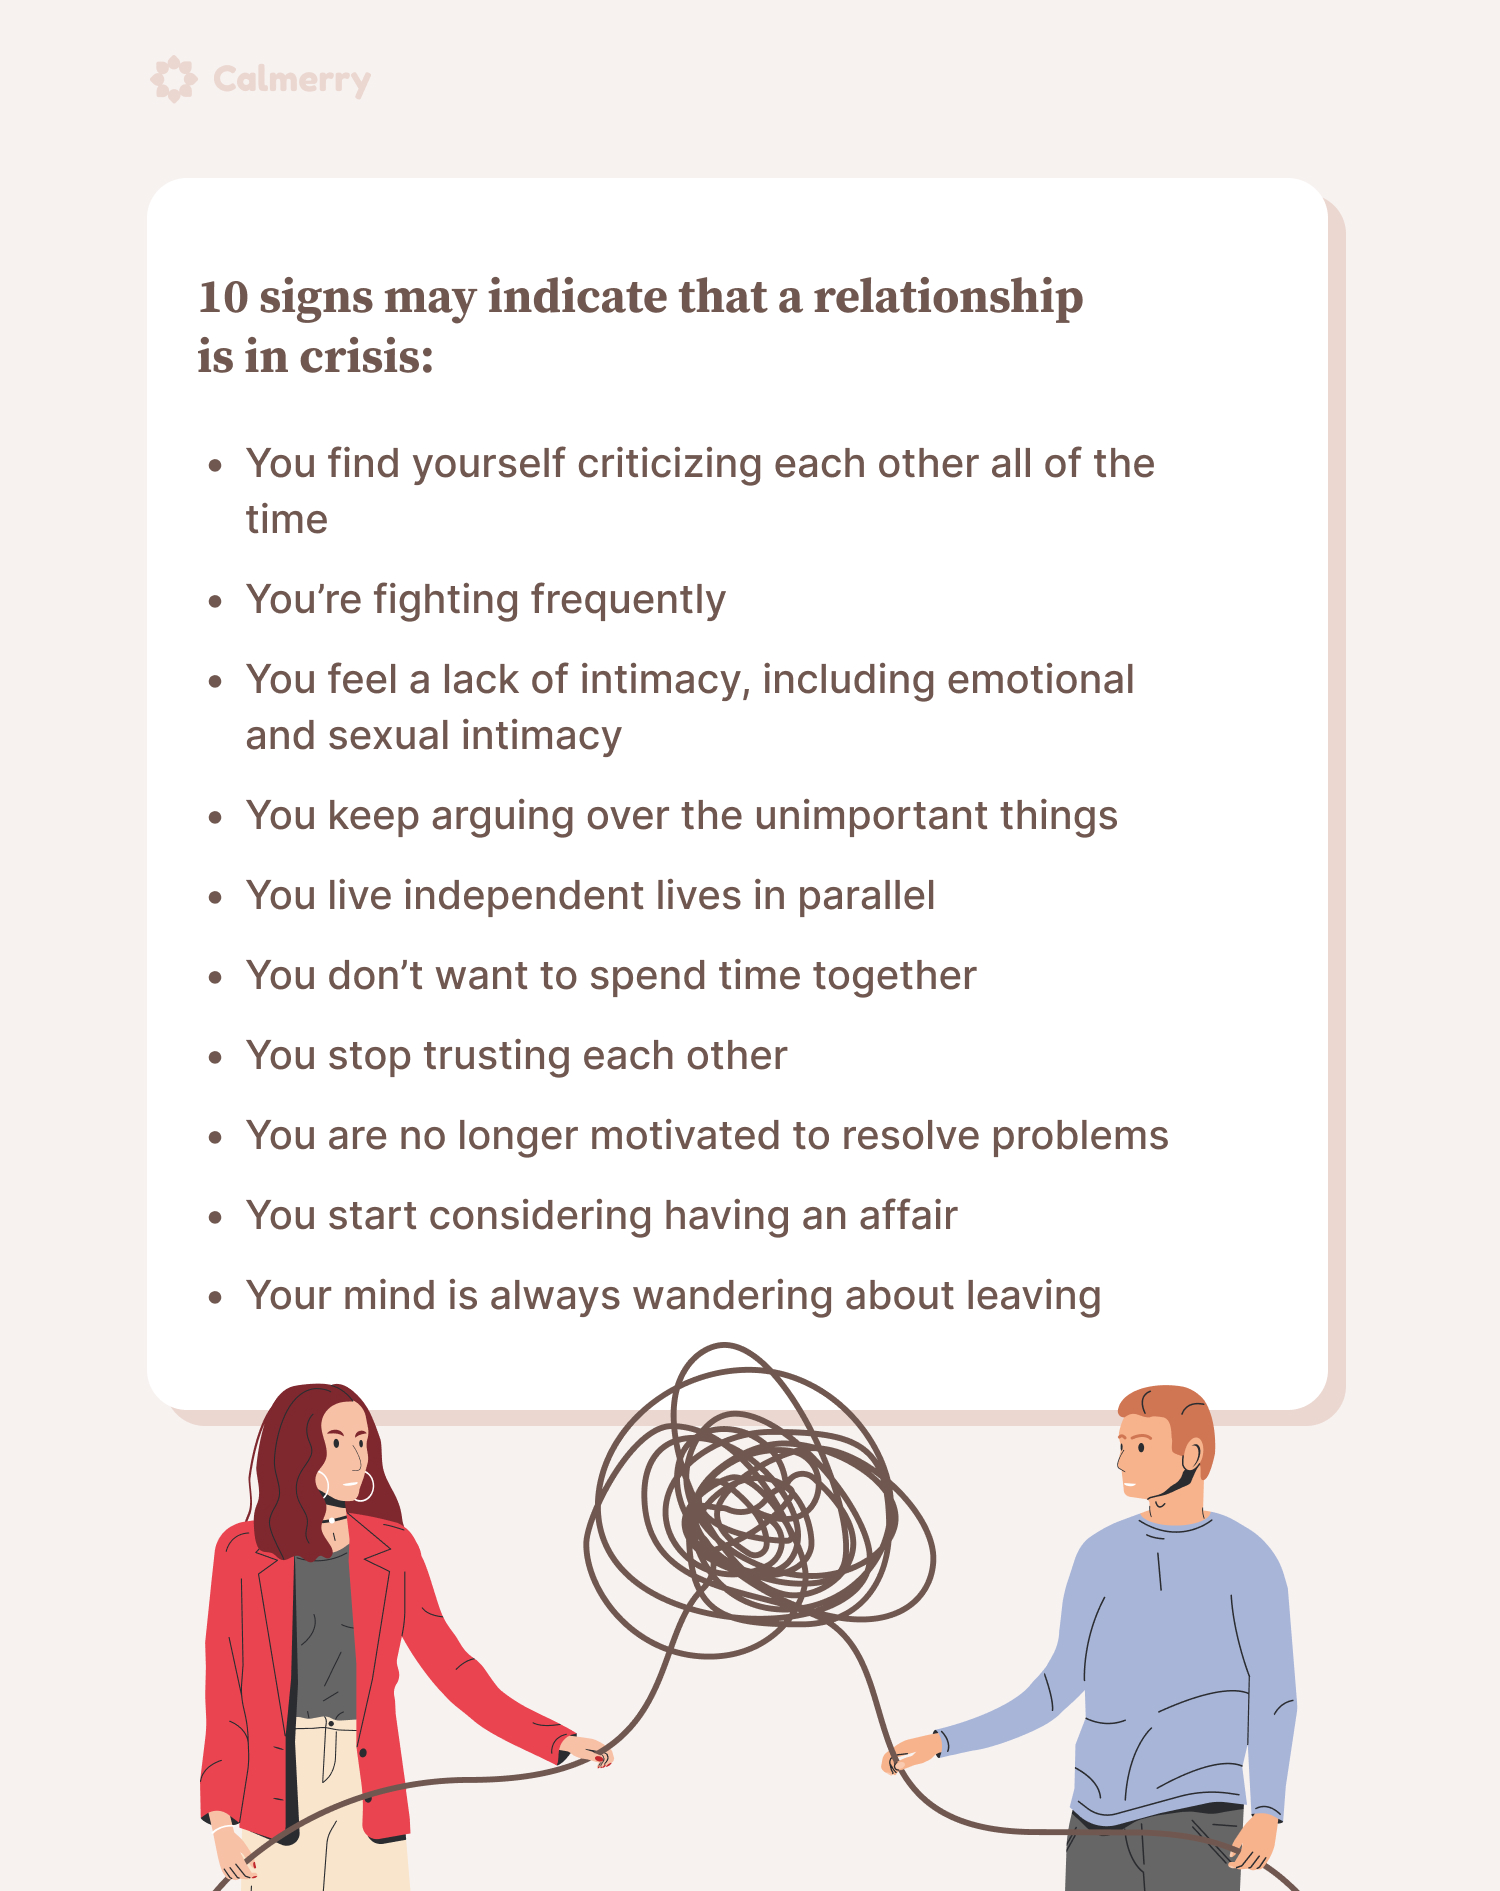 10 signs that a relationship is in crisis